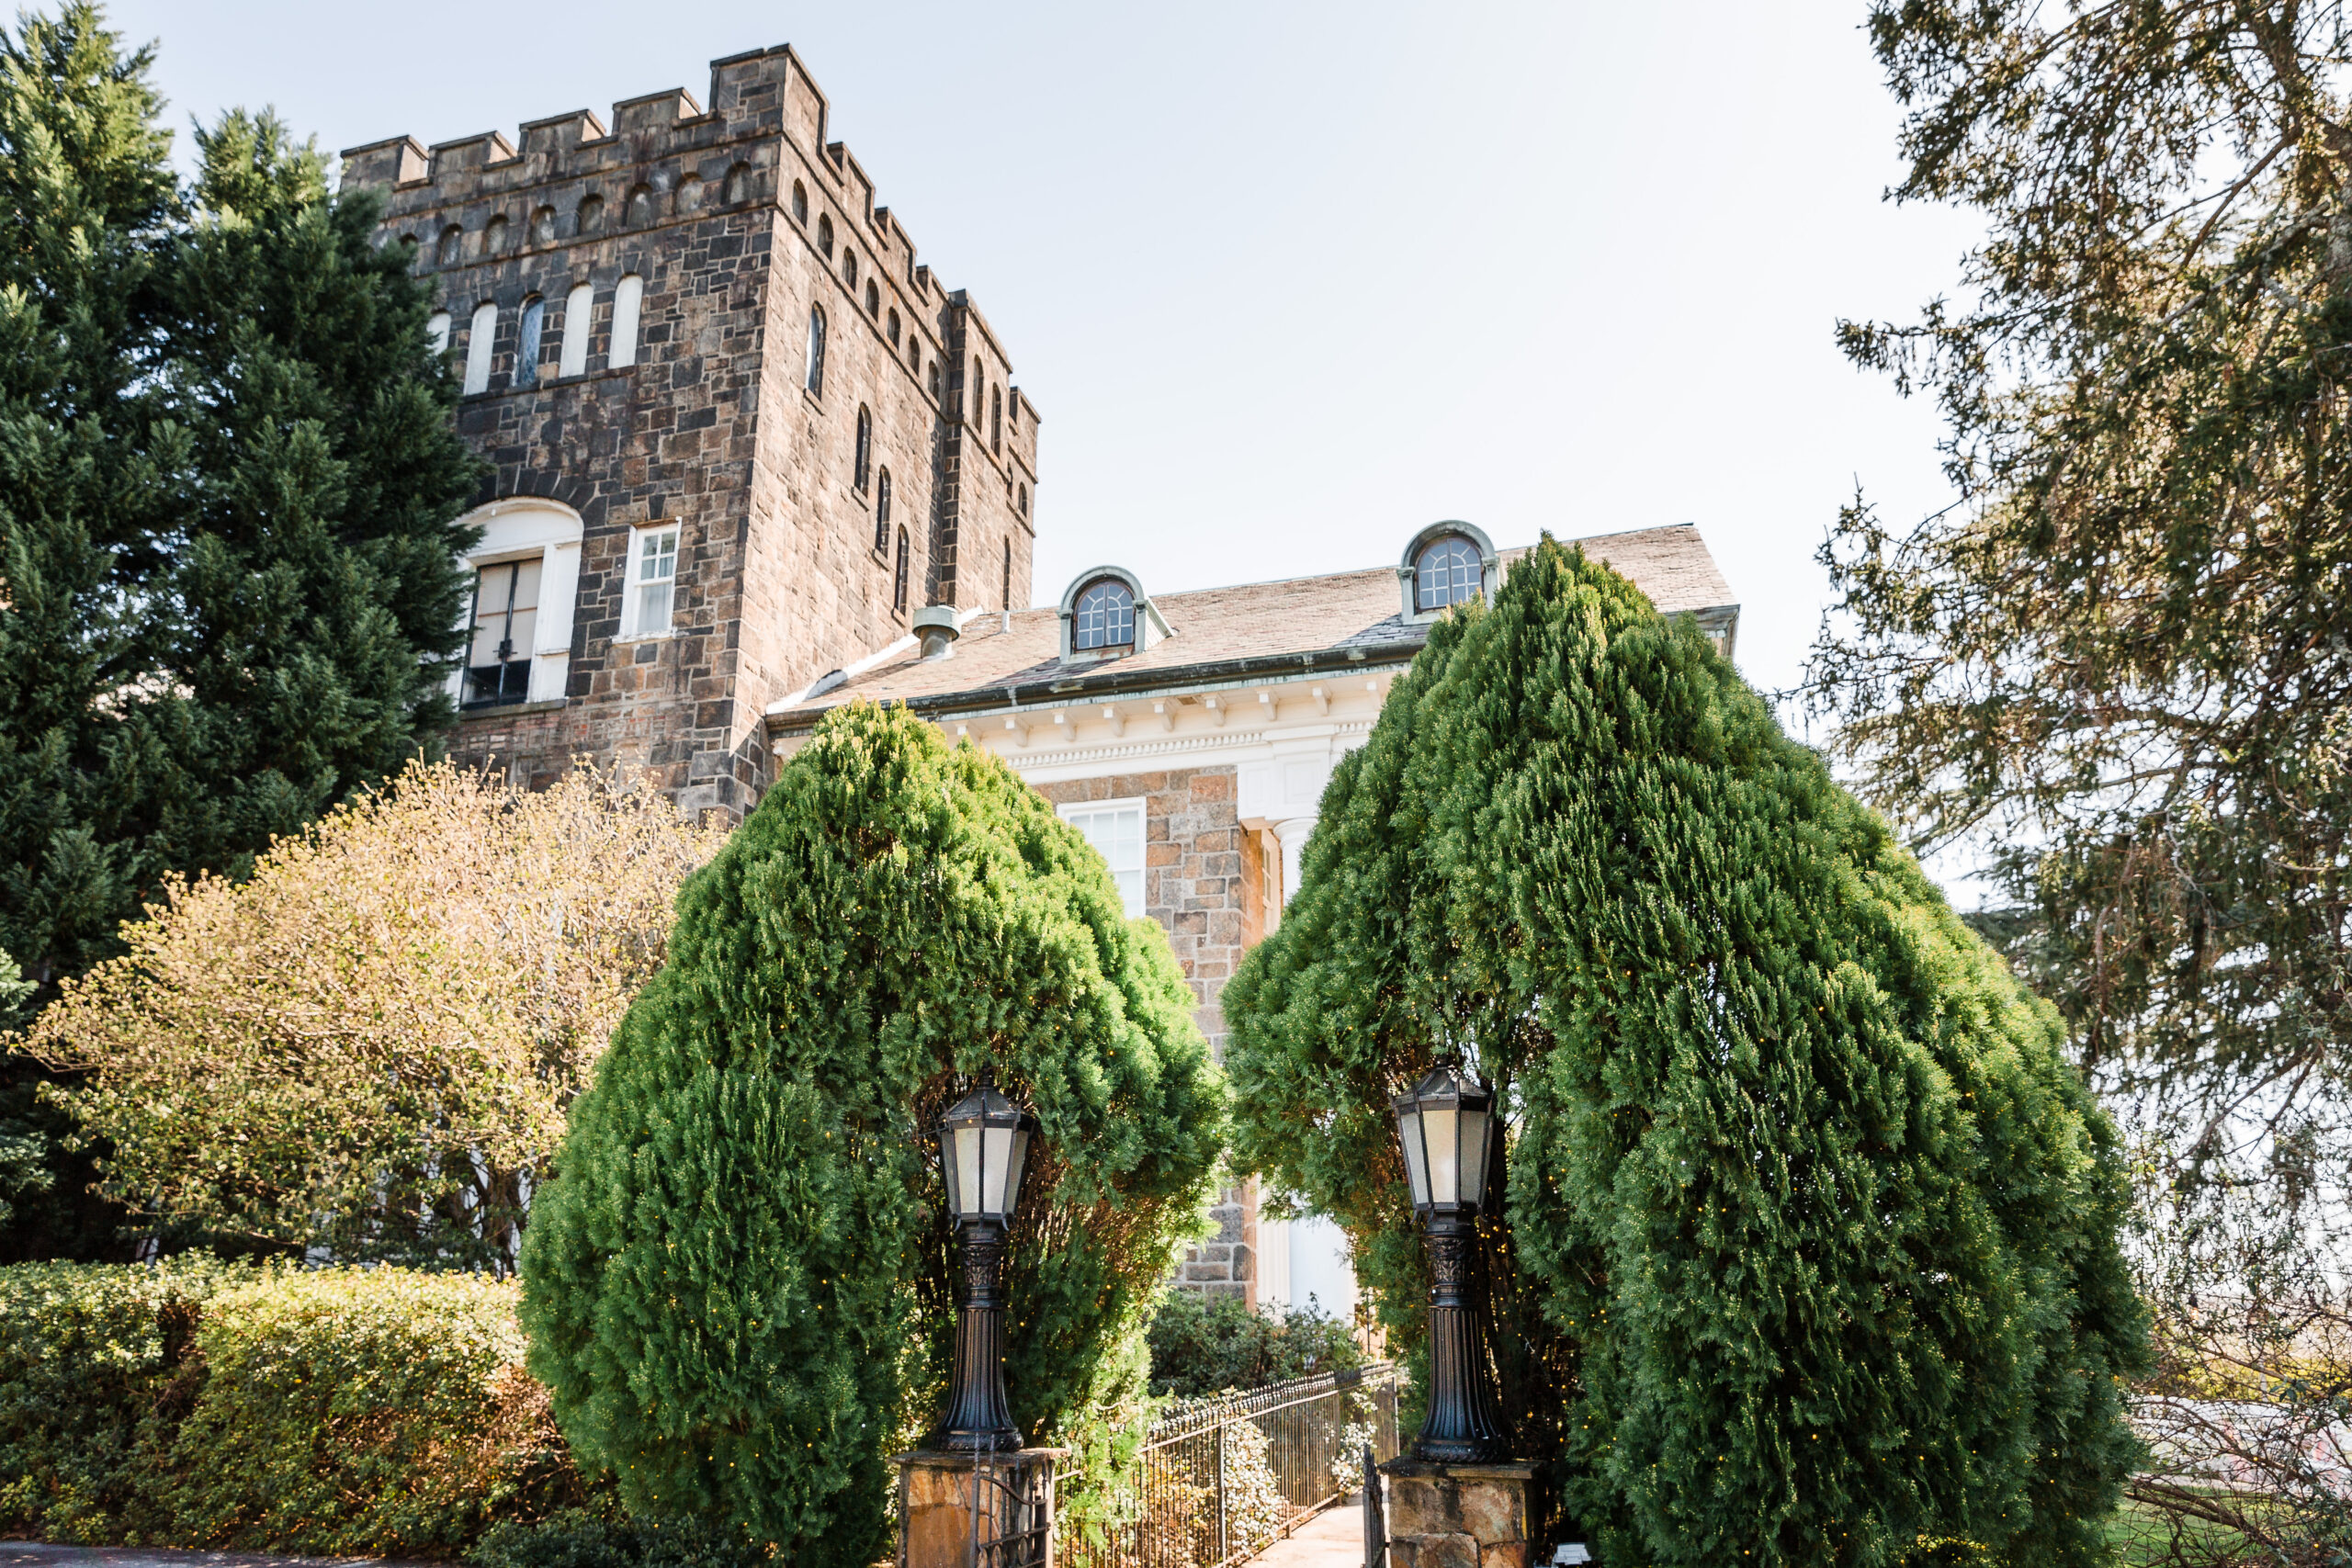 A view of the historic wedding venue, the Gassaway Mansion in Greenville, SC.